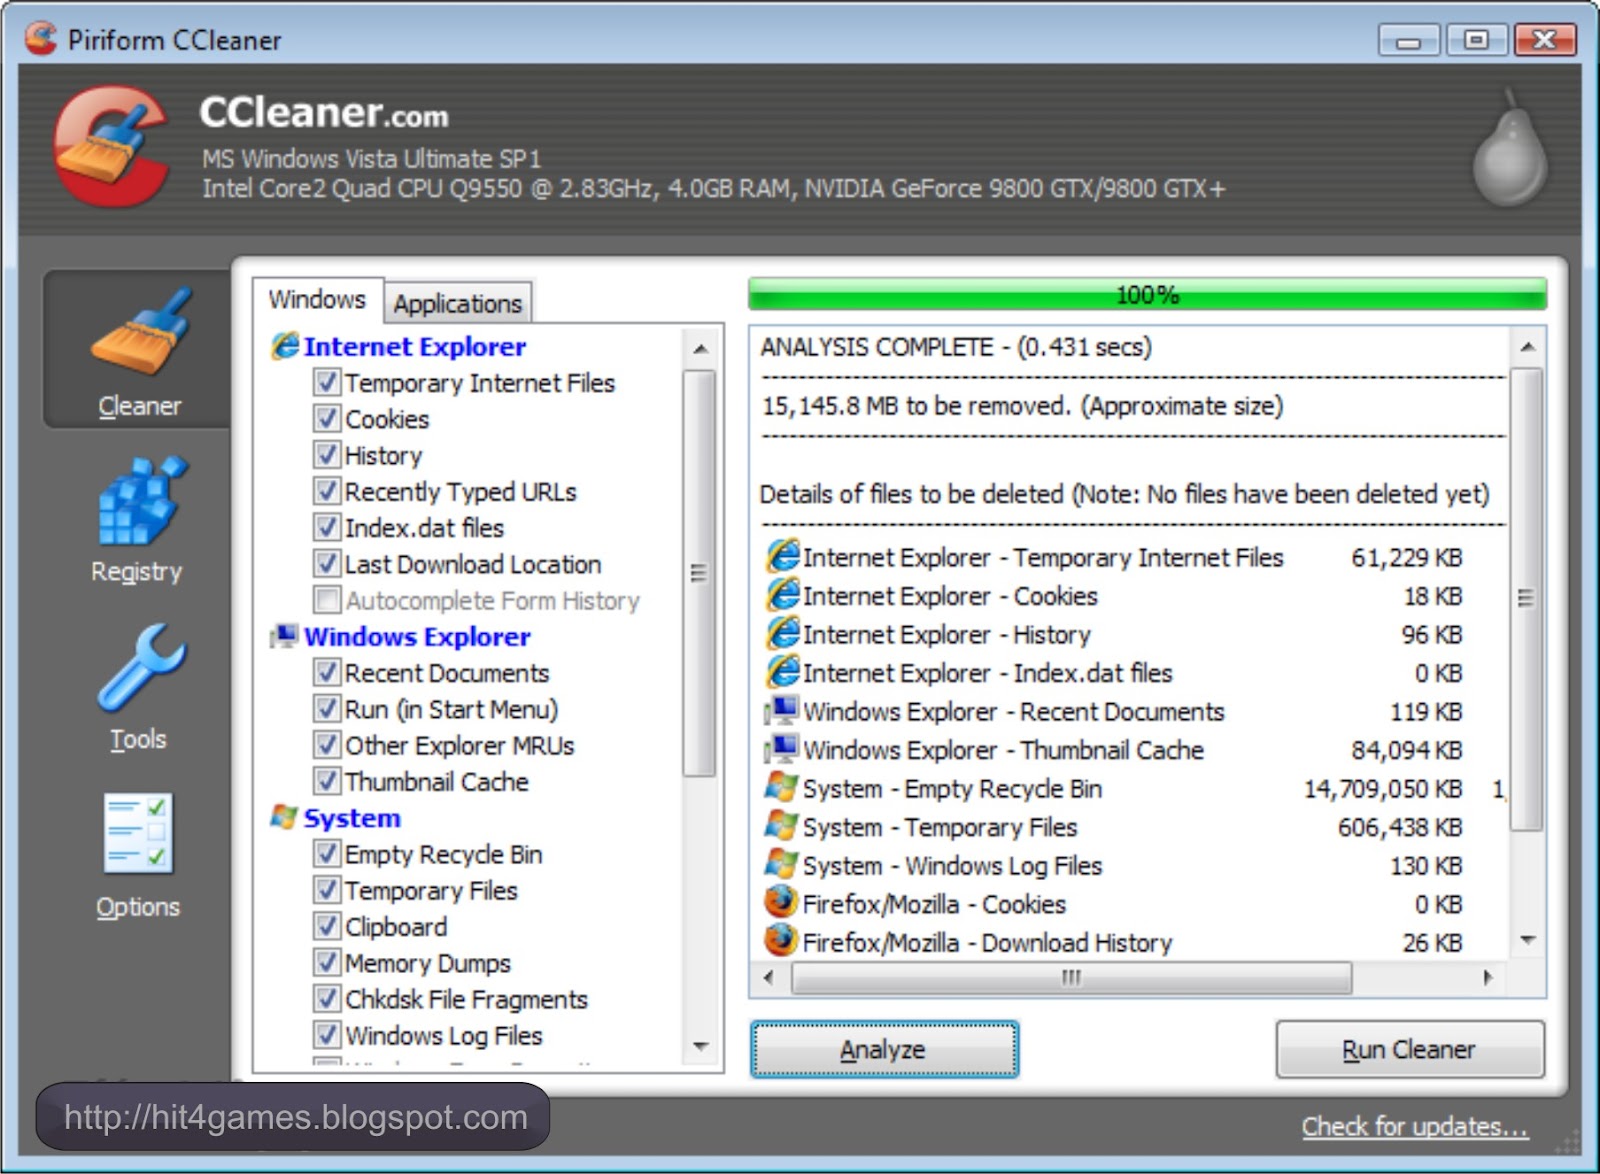 Pc cleaner and optimization for pubg - For windows bit download ccleaner for windows in paradise free update download antivirus